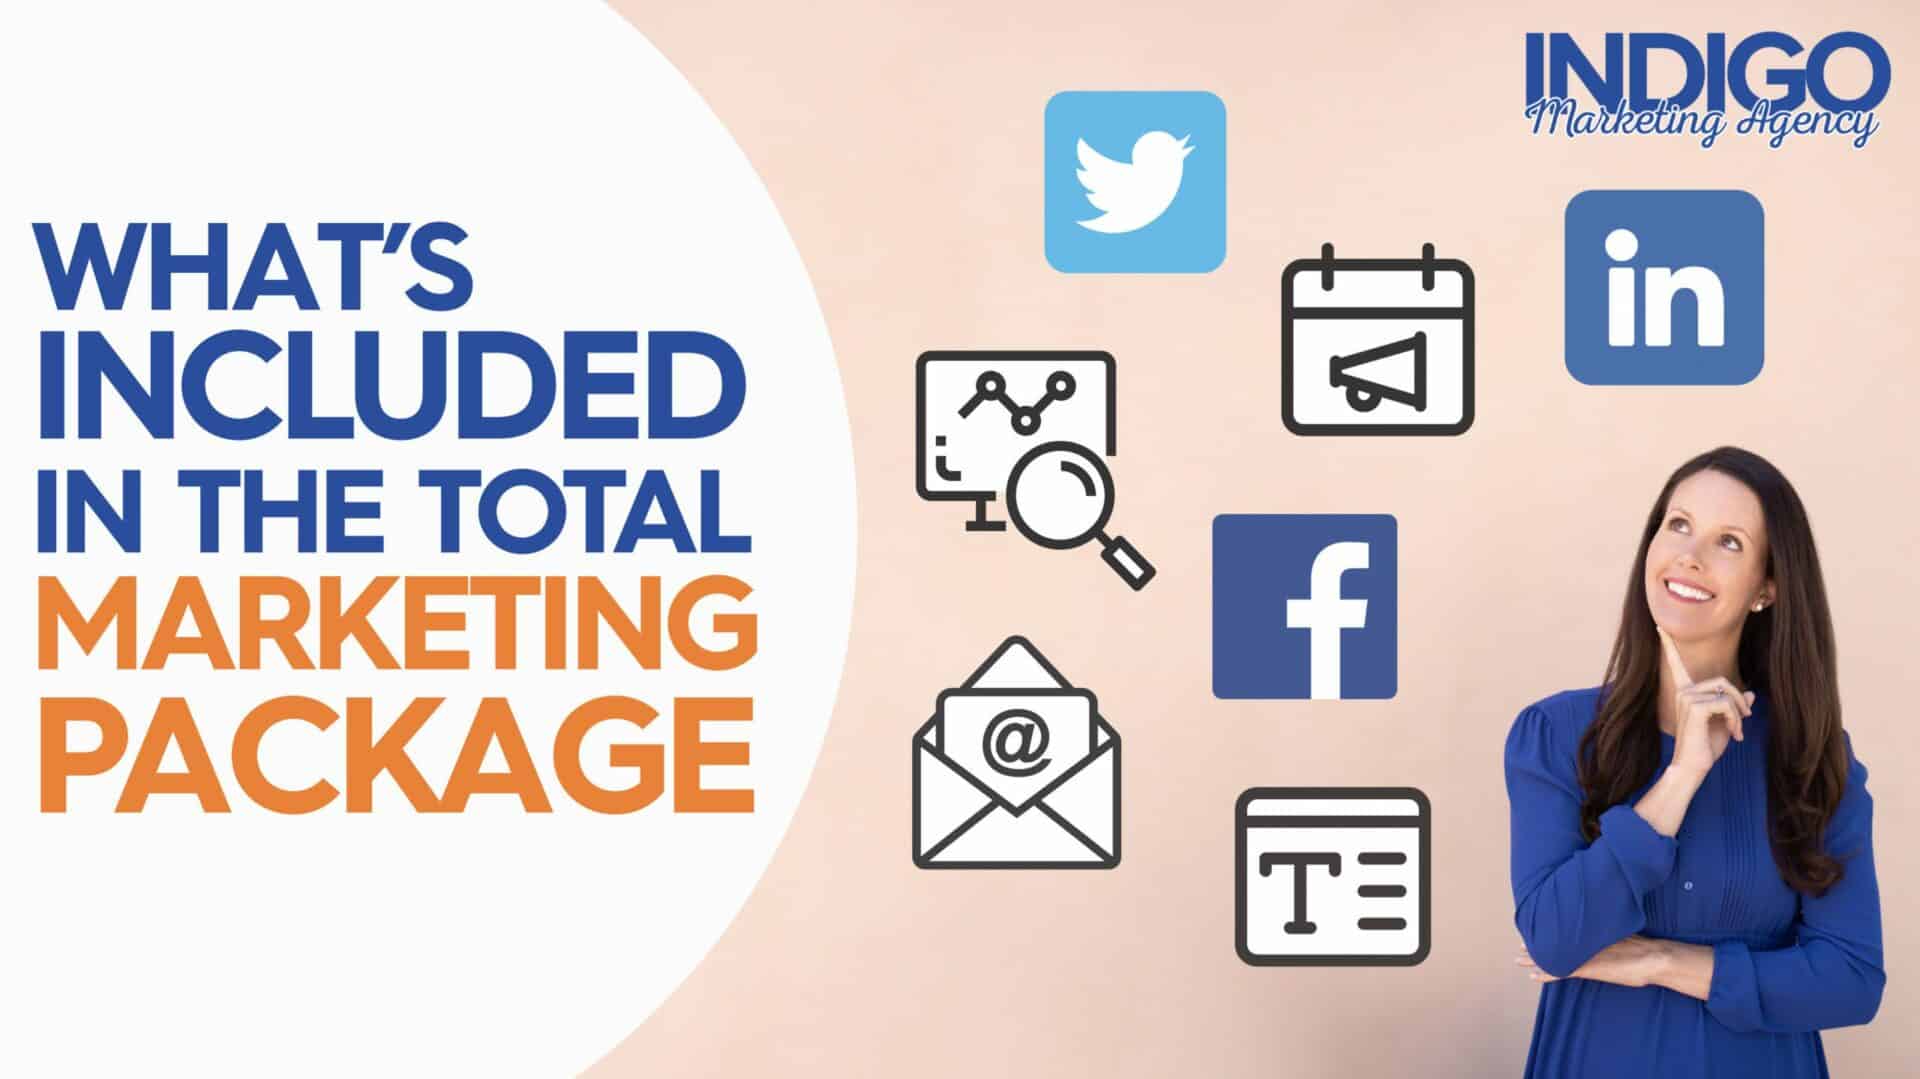 Whats Included in the Total Marketing Package